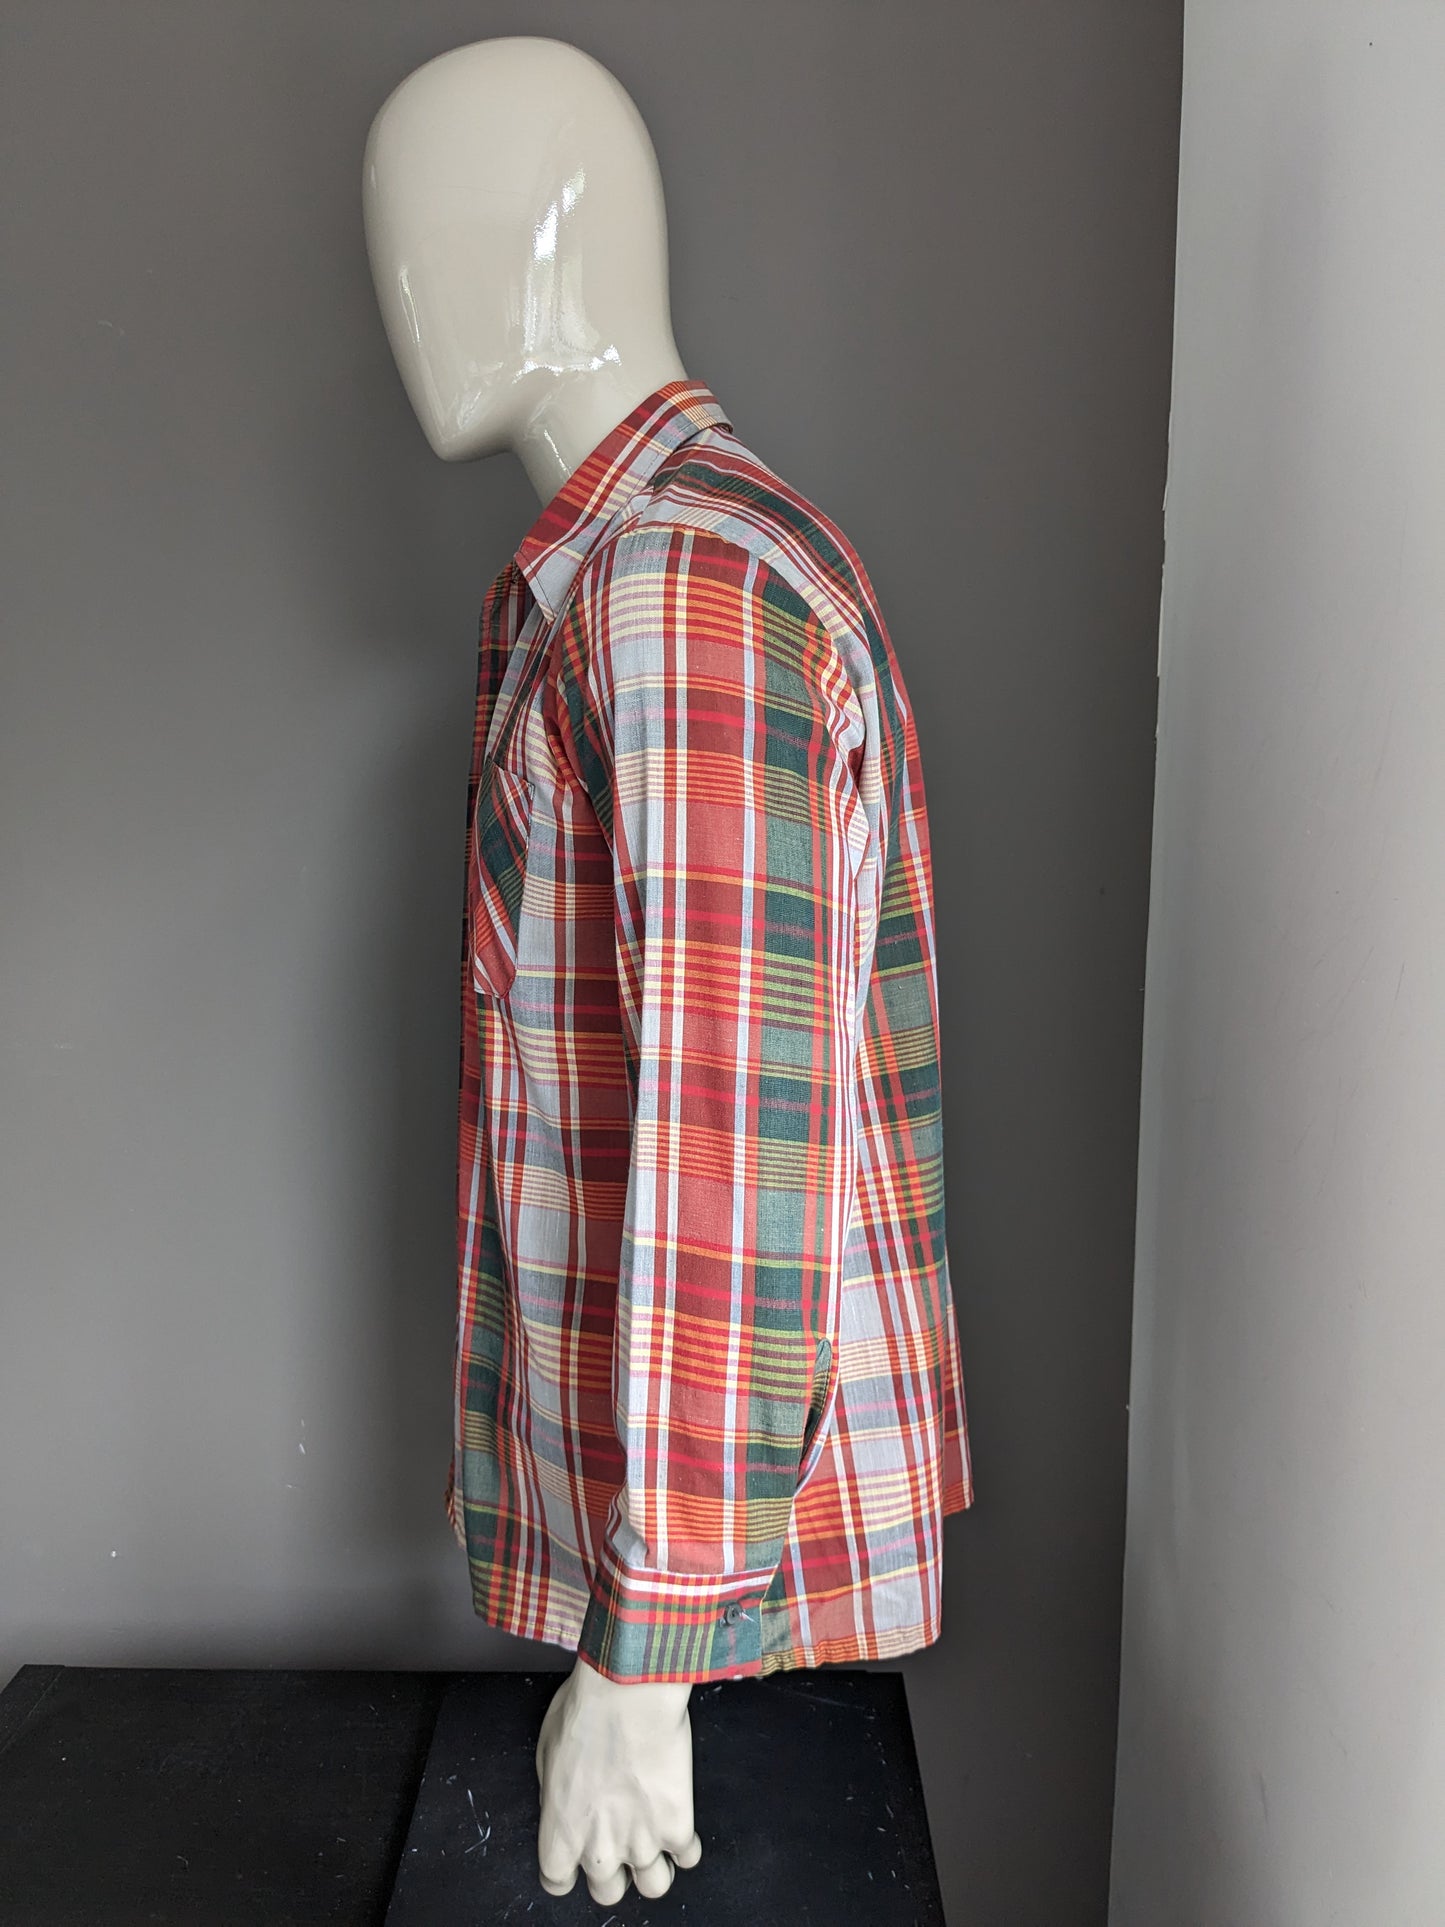 Vintage 70's shirt with point collar. Red green yellow checkered. Size XL.